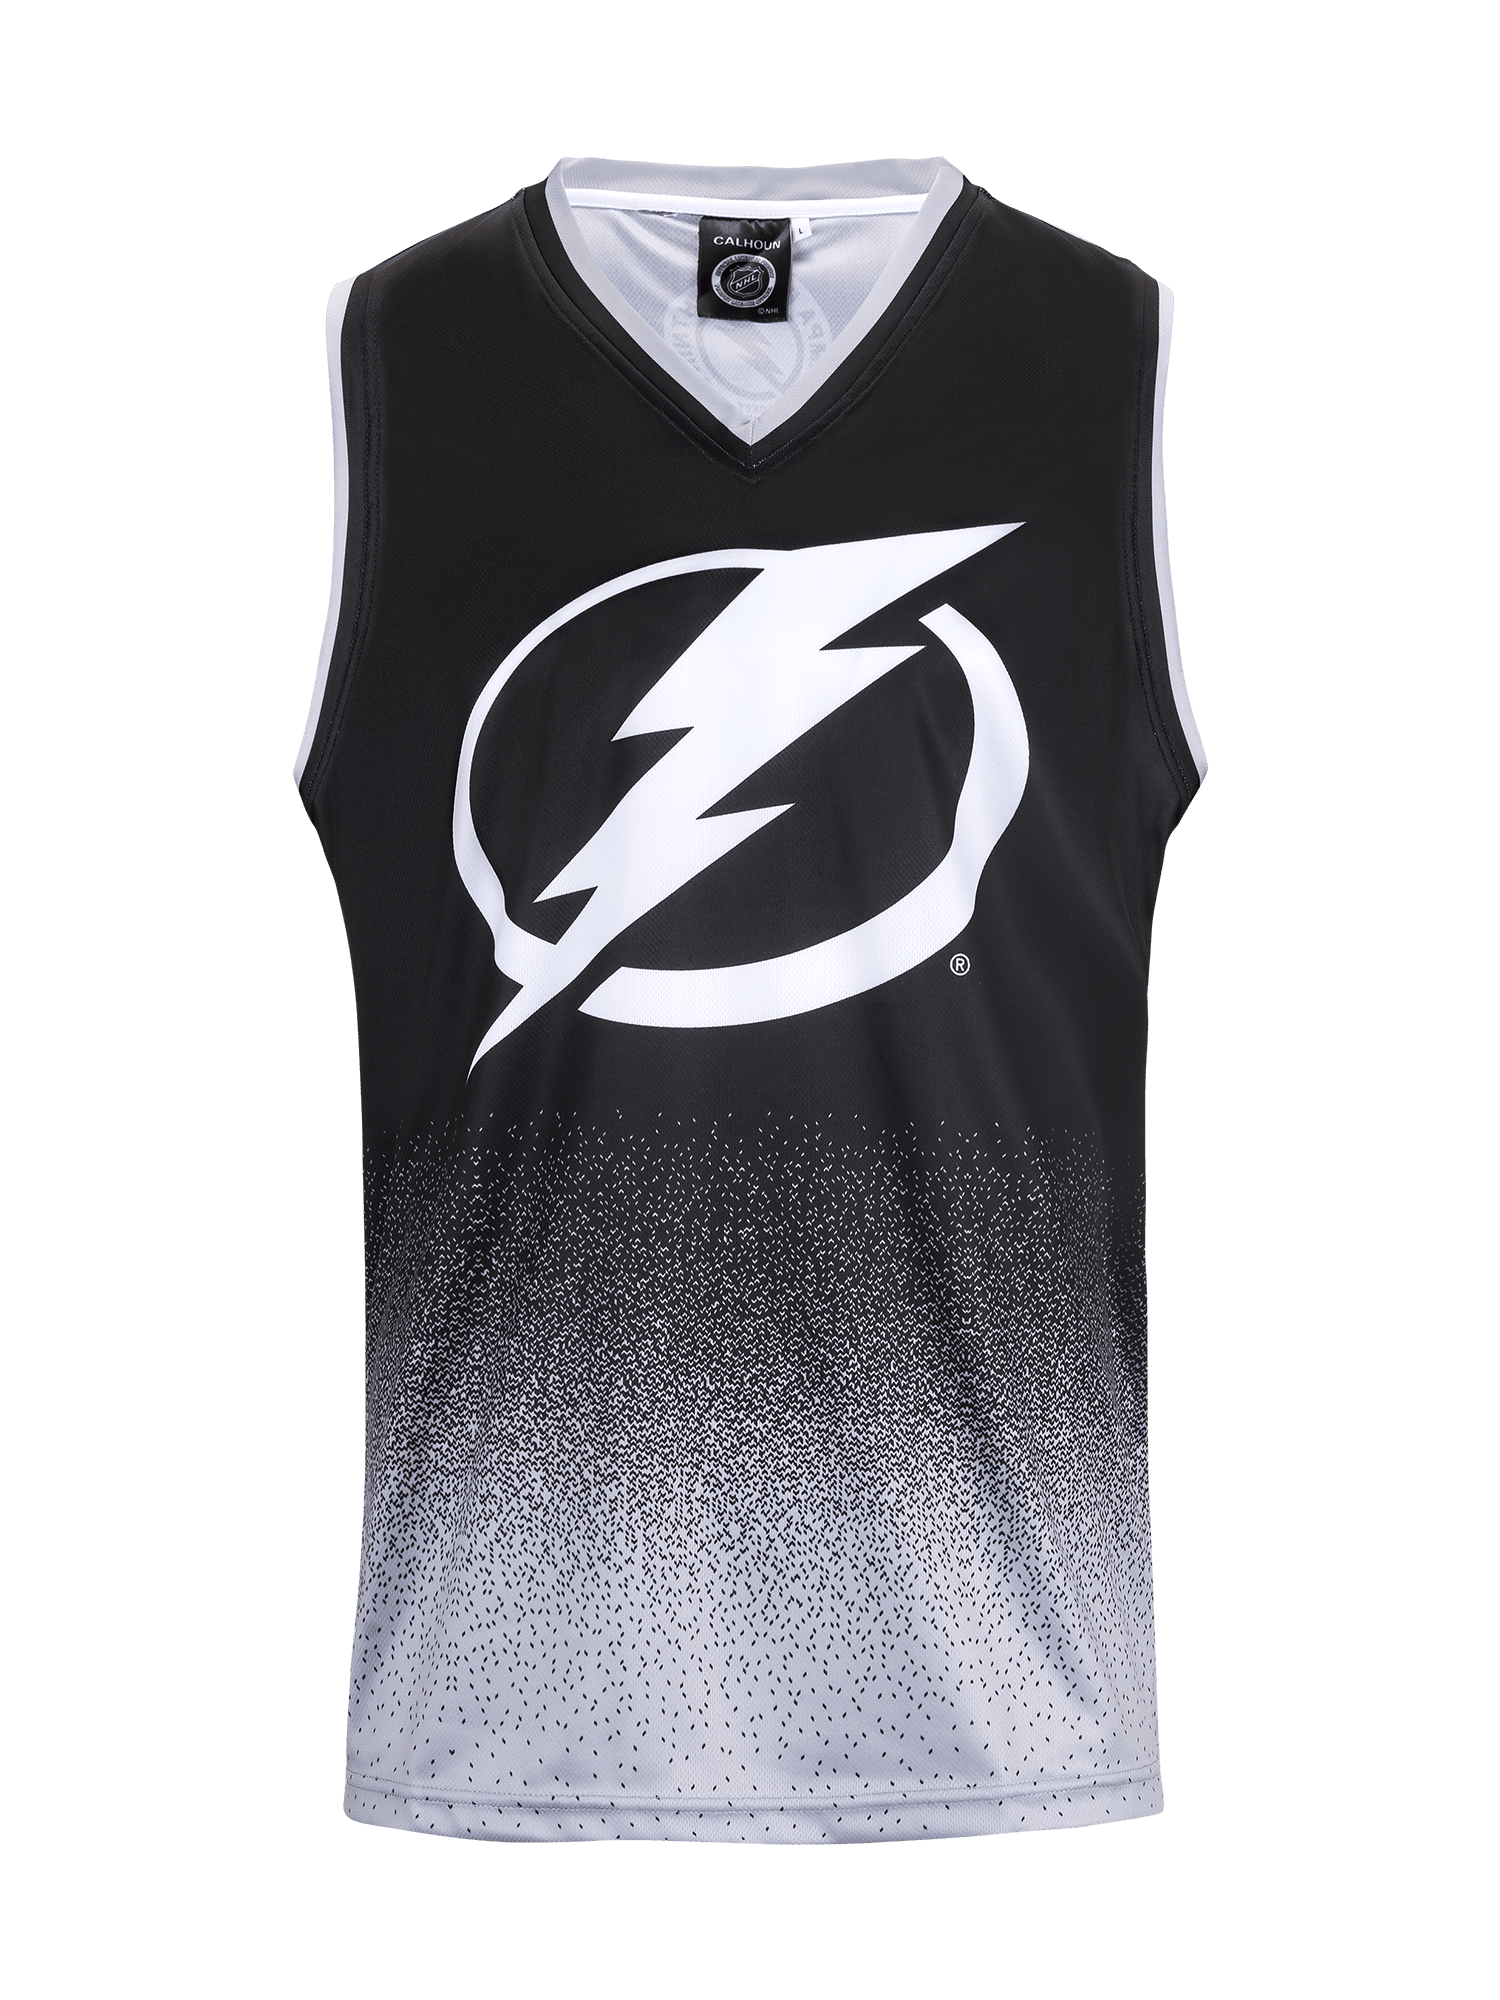 Lightning Round: check out the Bolts Reverse Retro jersey and